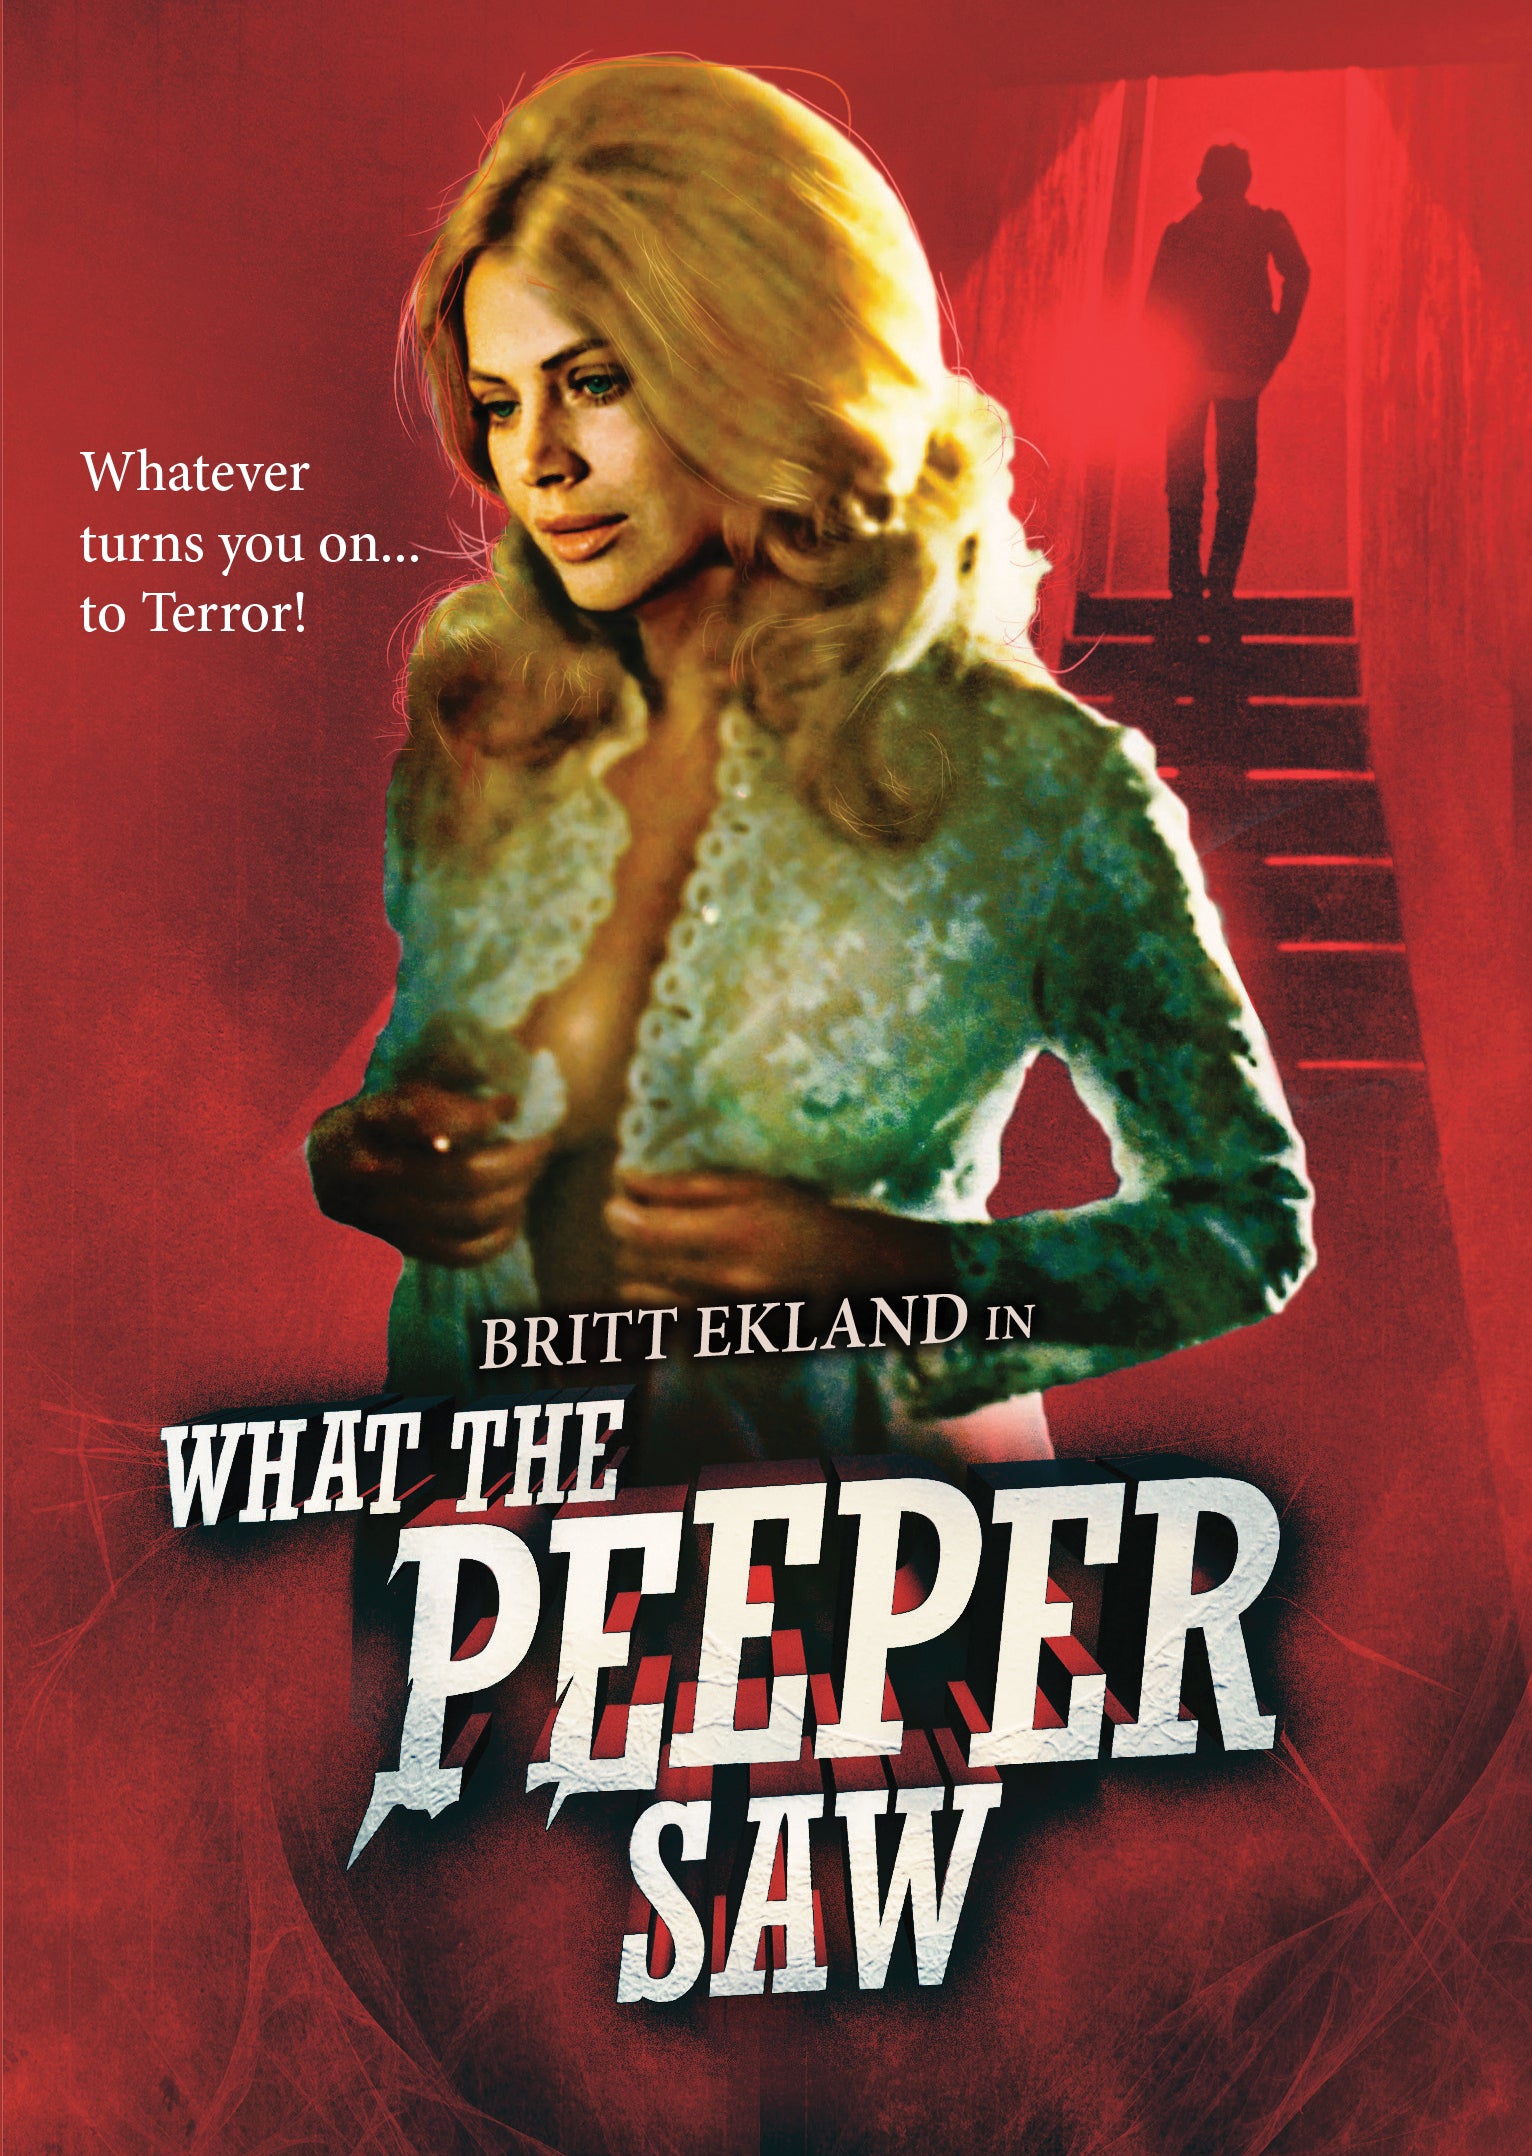 WHAT THE PEEPER SAW DVD